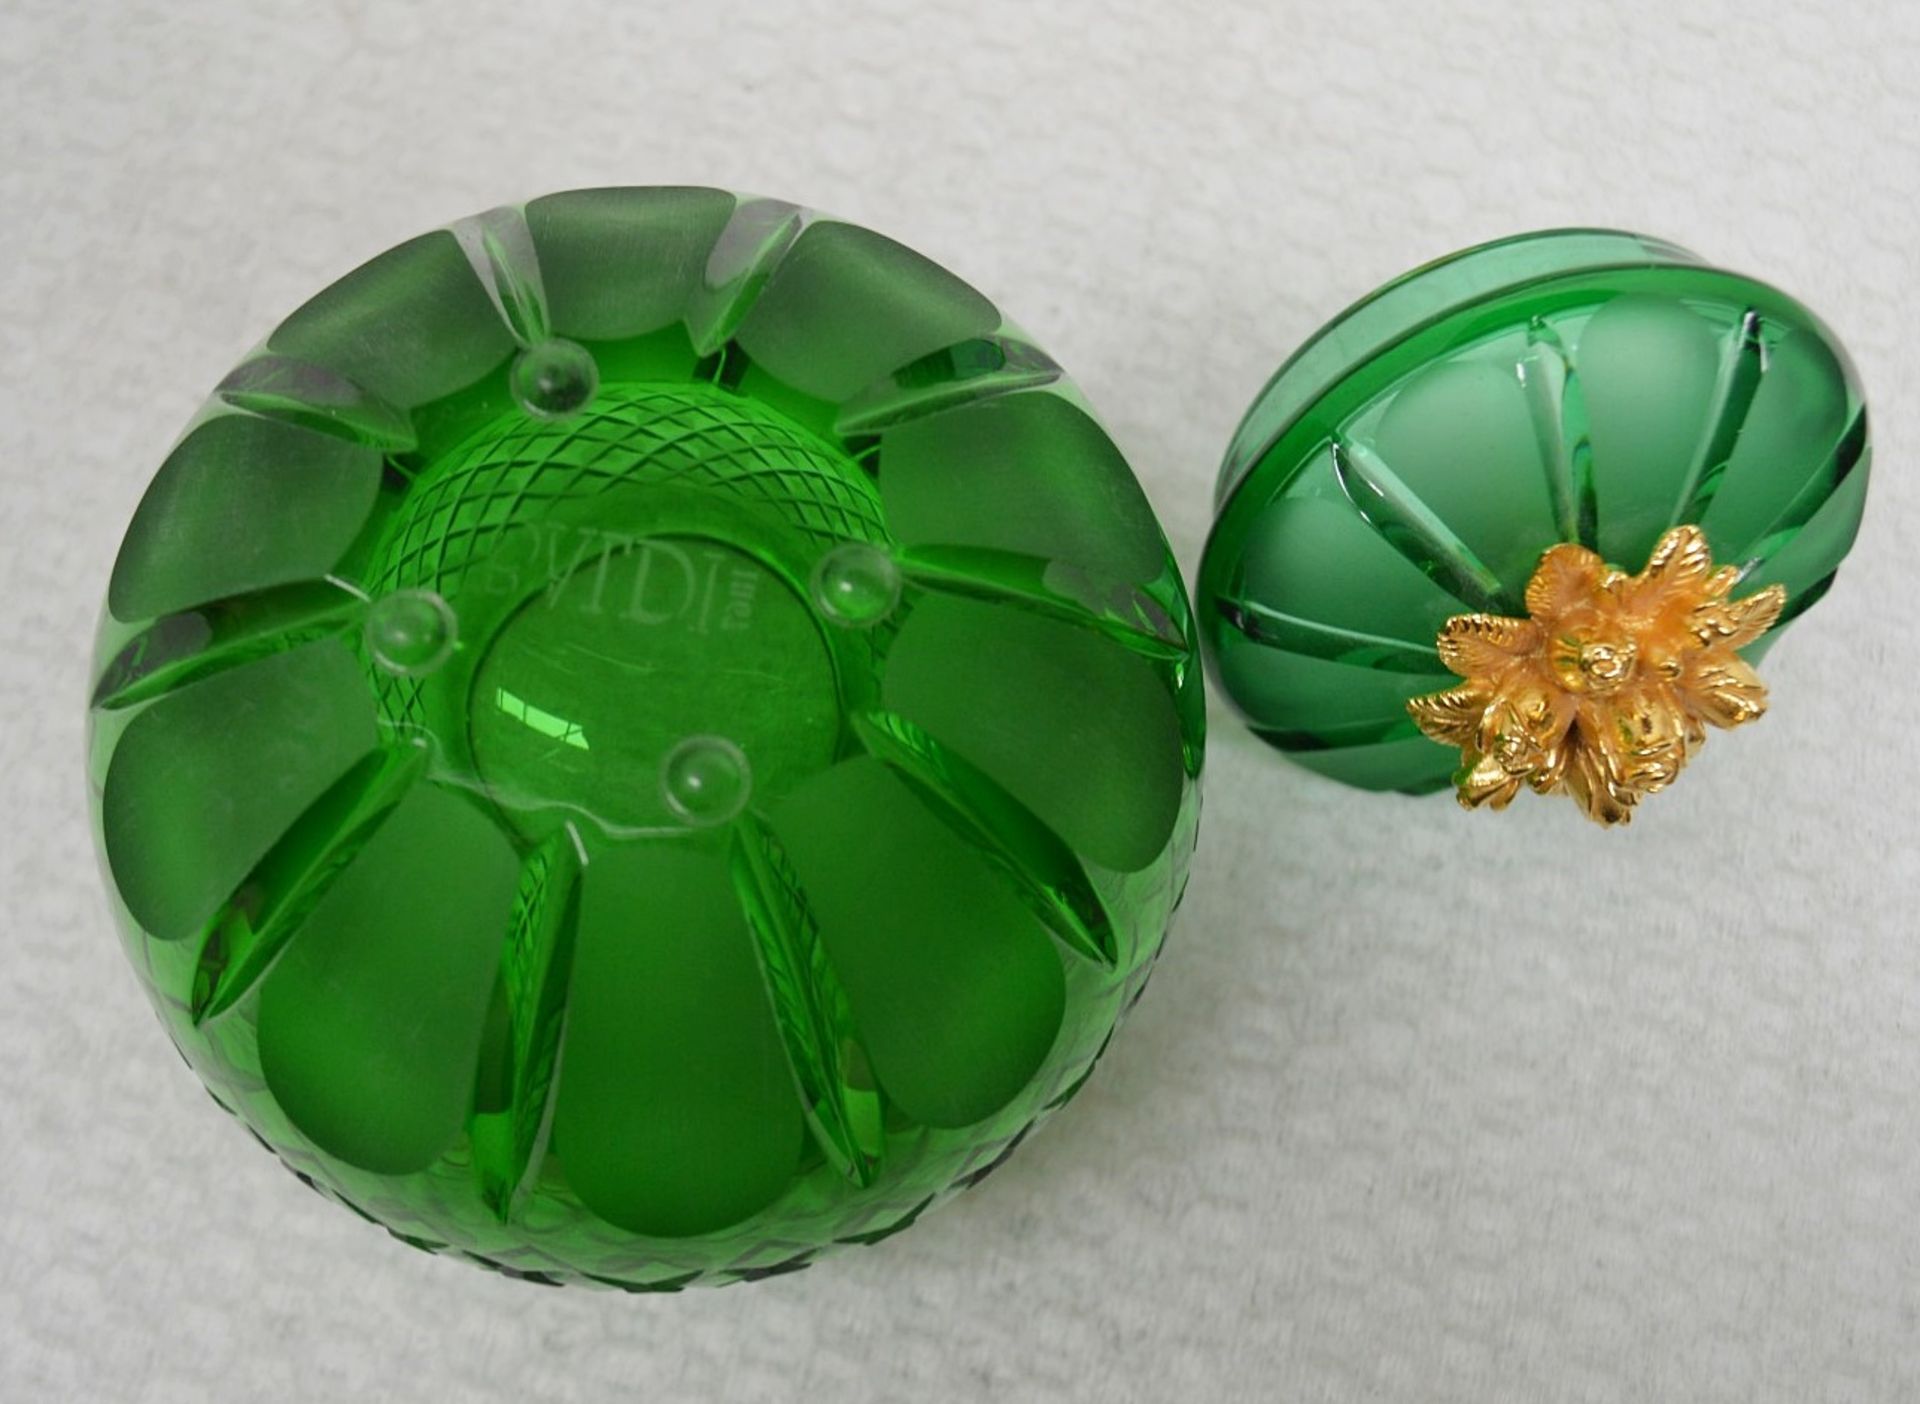 1 x BALDI 'Home Jewels' Italian Hand-crafted Artisan Crystal Coccinella Box In Green - Image 4 of 5